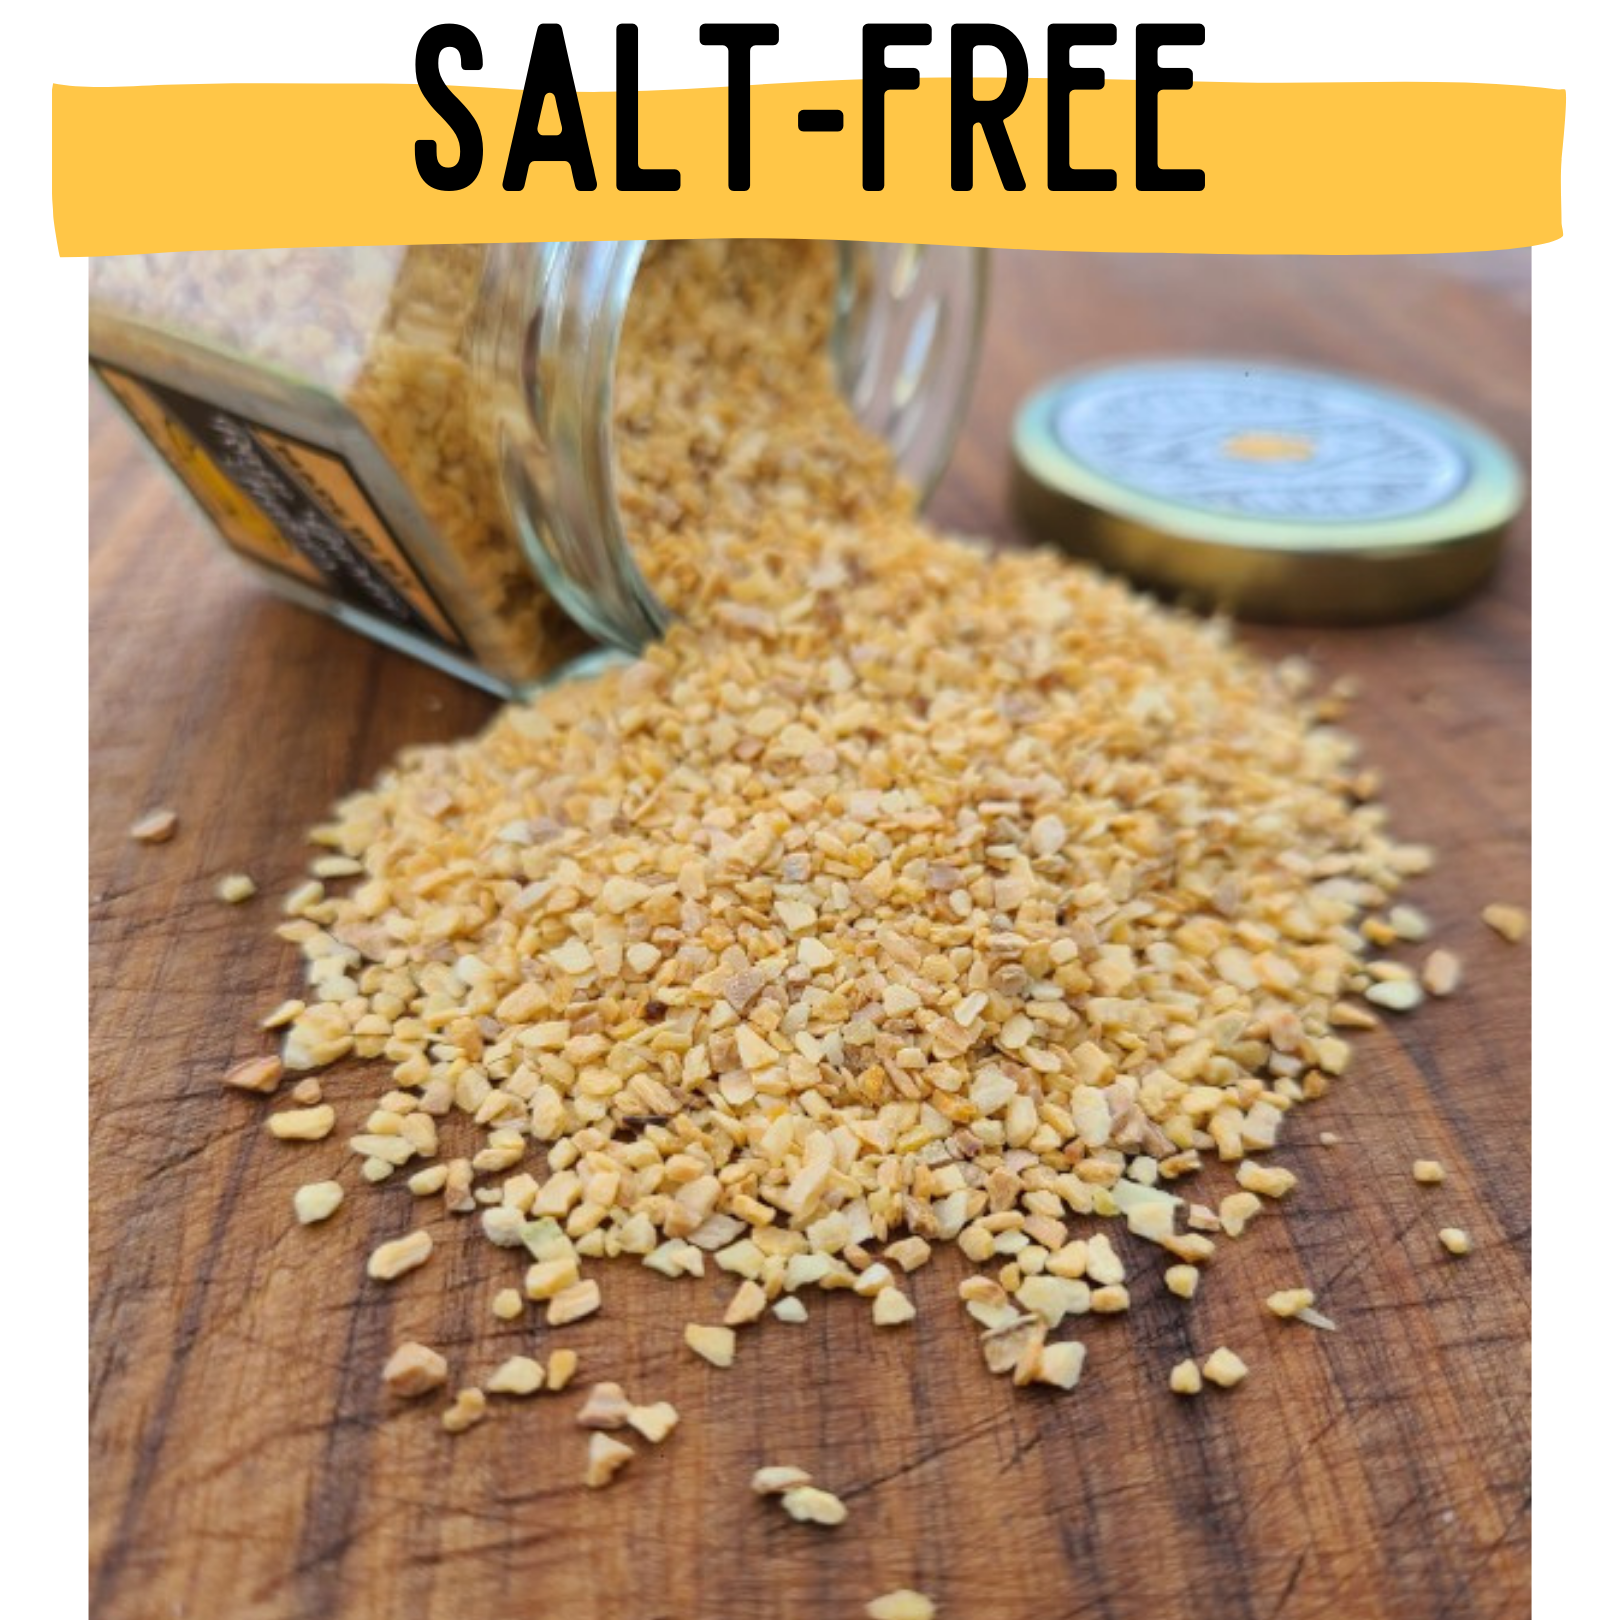 Salt-free powders and spice blends